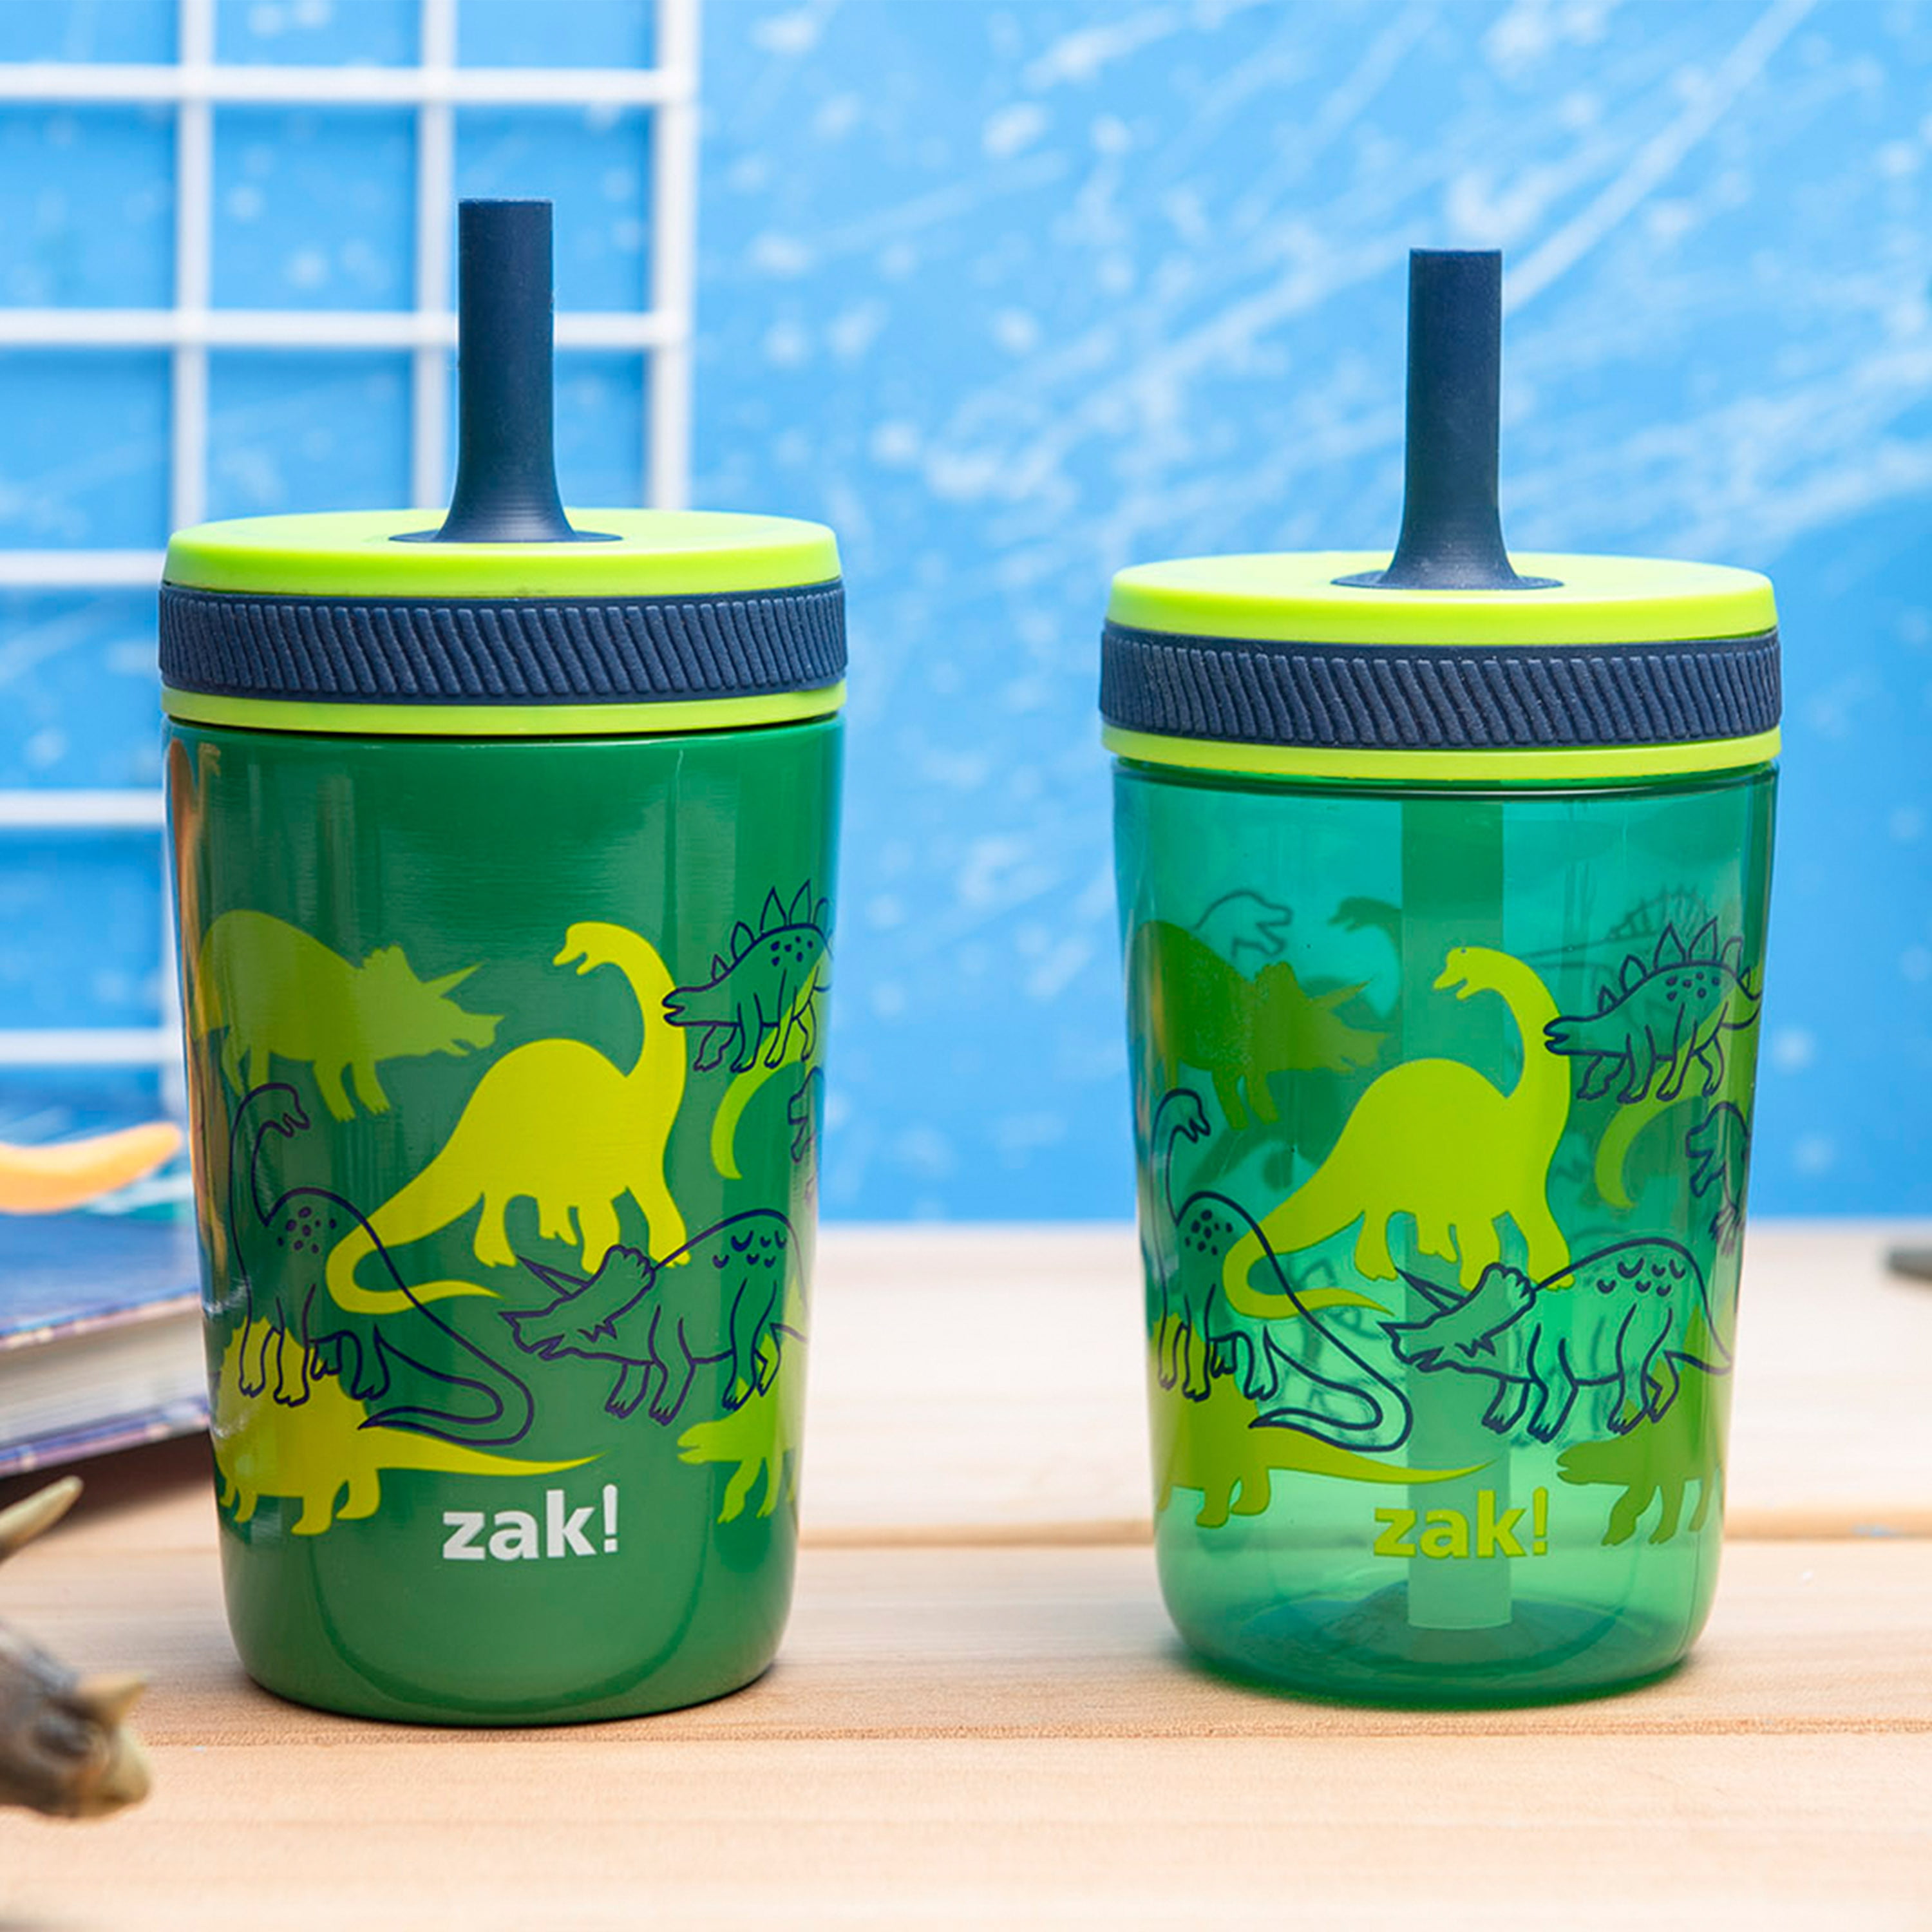 Zak Designs Campout and Camping Kelso Tumbler Set, Leak-Proof Screw-On Lid with Straw, Bundle for Kids Includes Plastic and Stainless Steel Cups